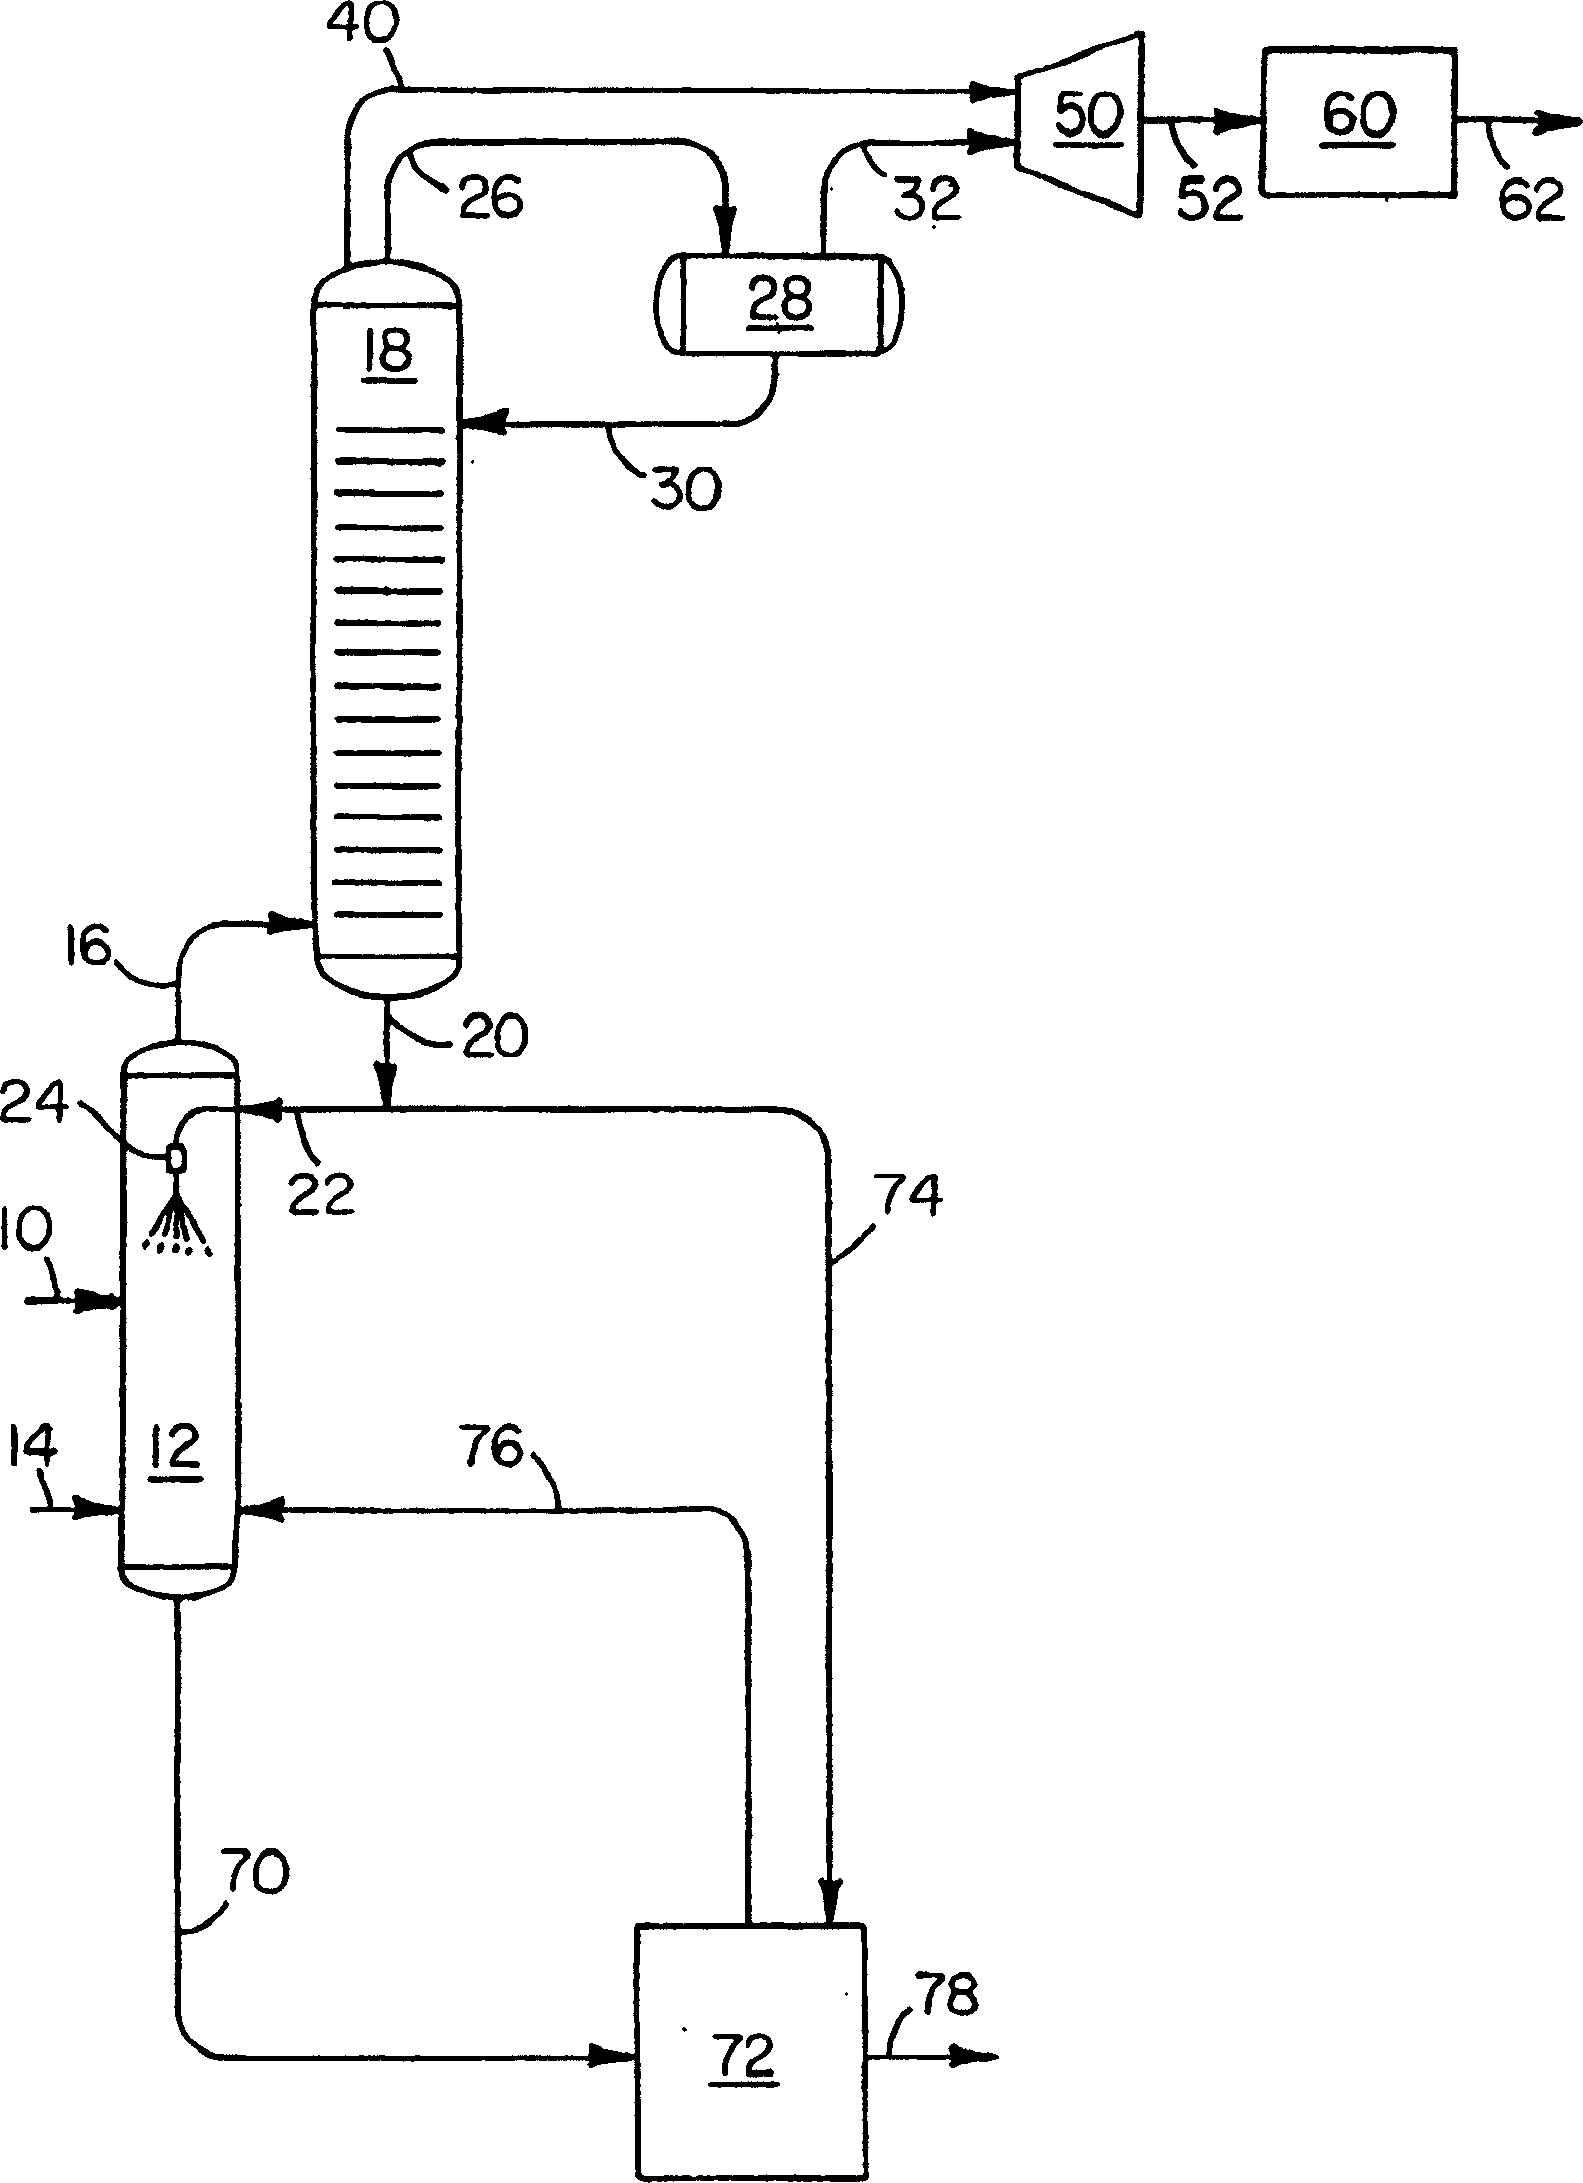 Process for production of aromatic carboxylic acids with improved water removal technique